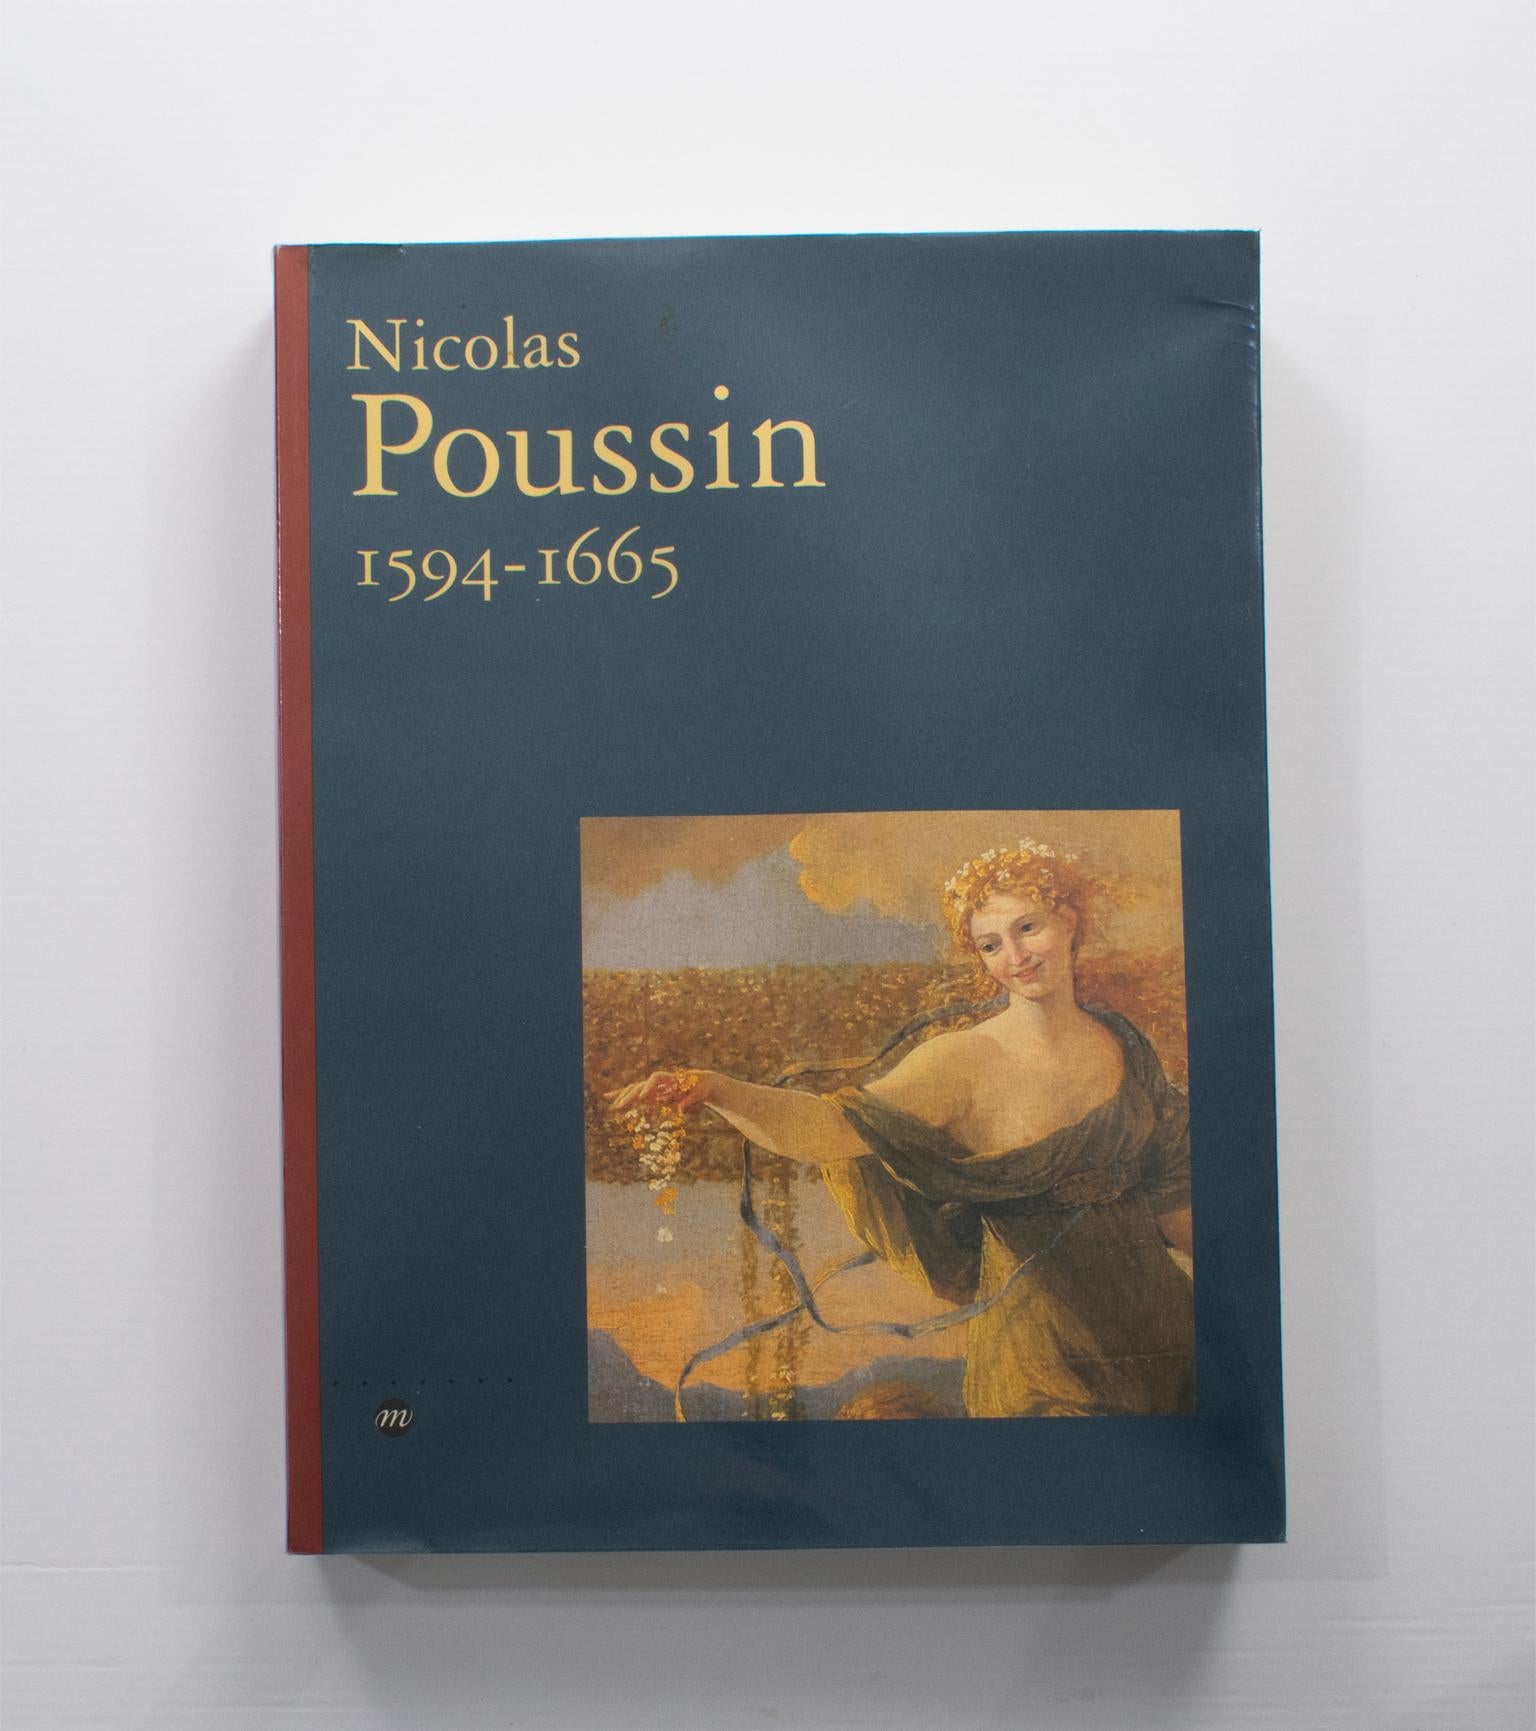 Nicolas Poussin 1594-1665, French book by Pierre Rosemberg et Louis-Antoine prat, 1995.
This book was published after the fourth centenary of the artist's birth. The volume accompanies the most acute extensive retrospective that, to date, has never